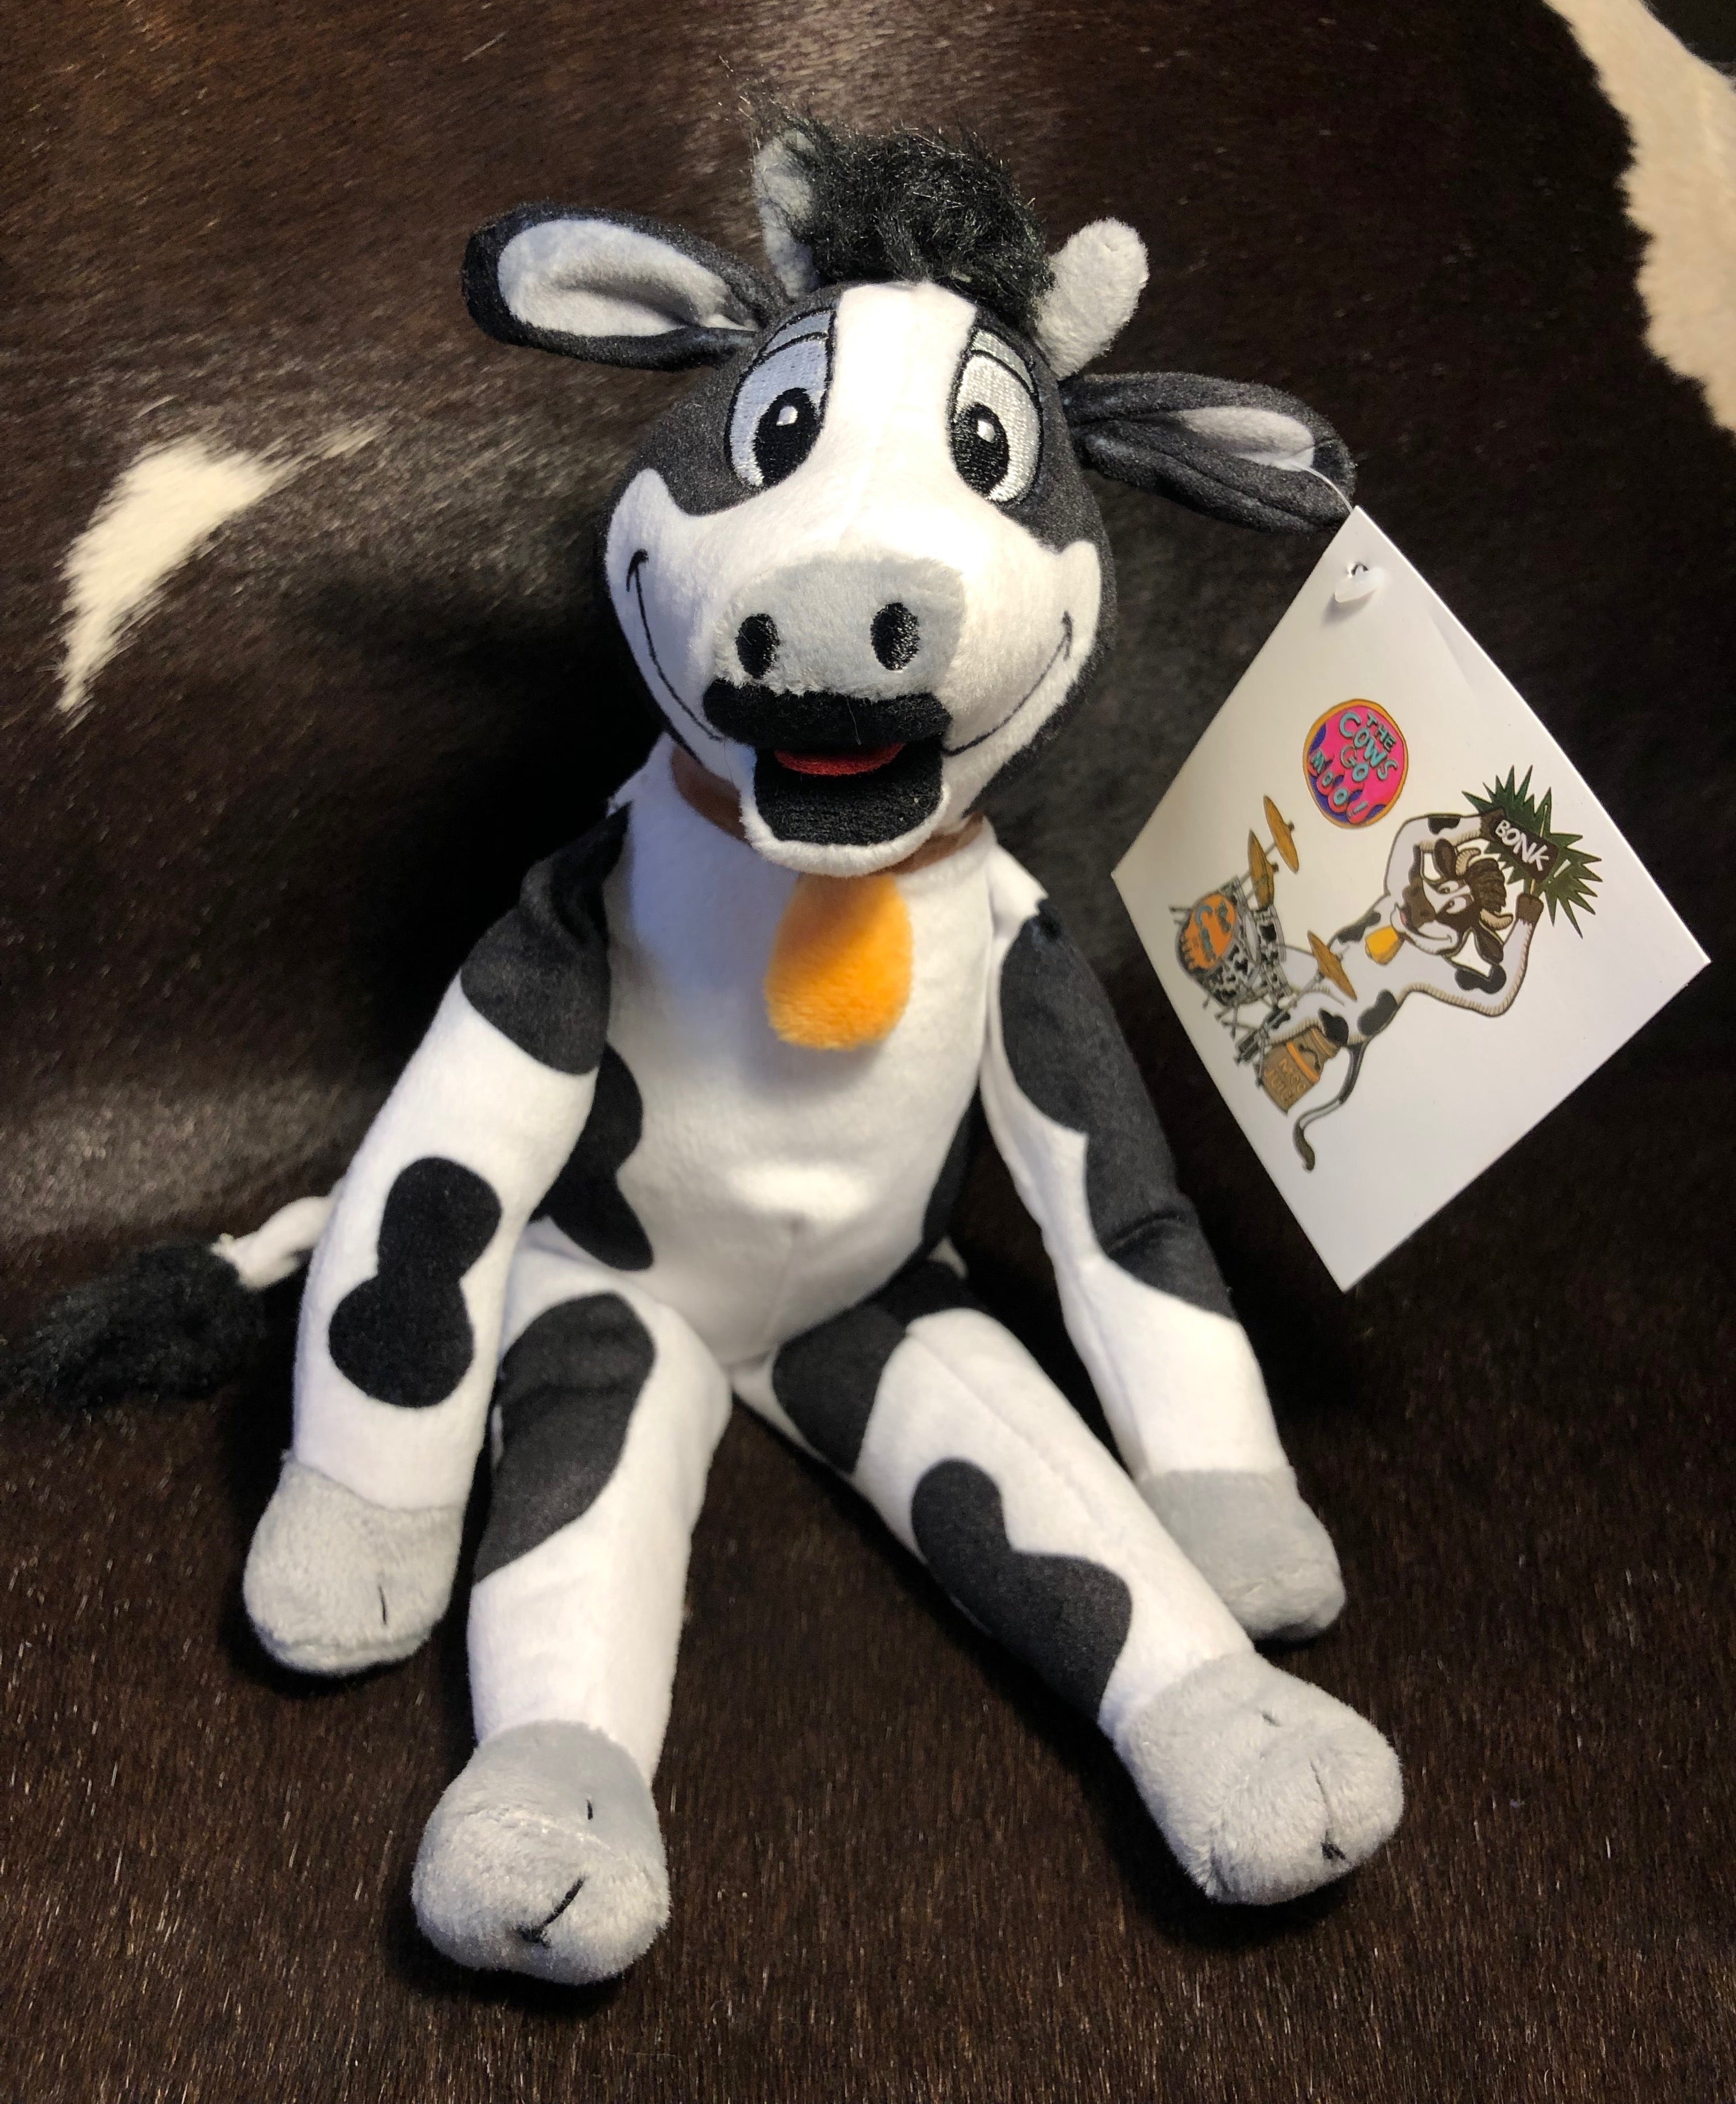 cow goes moo toy